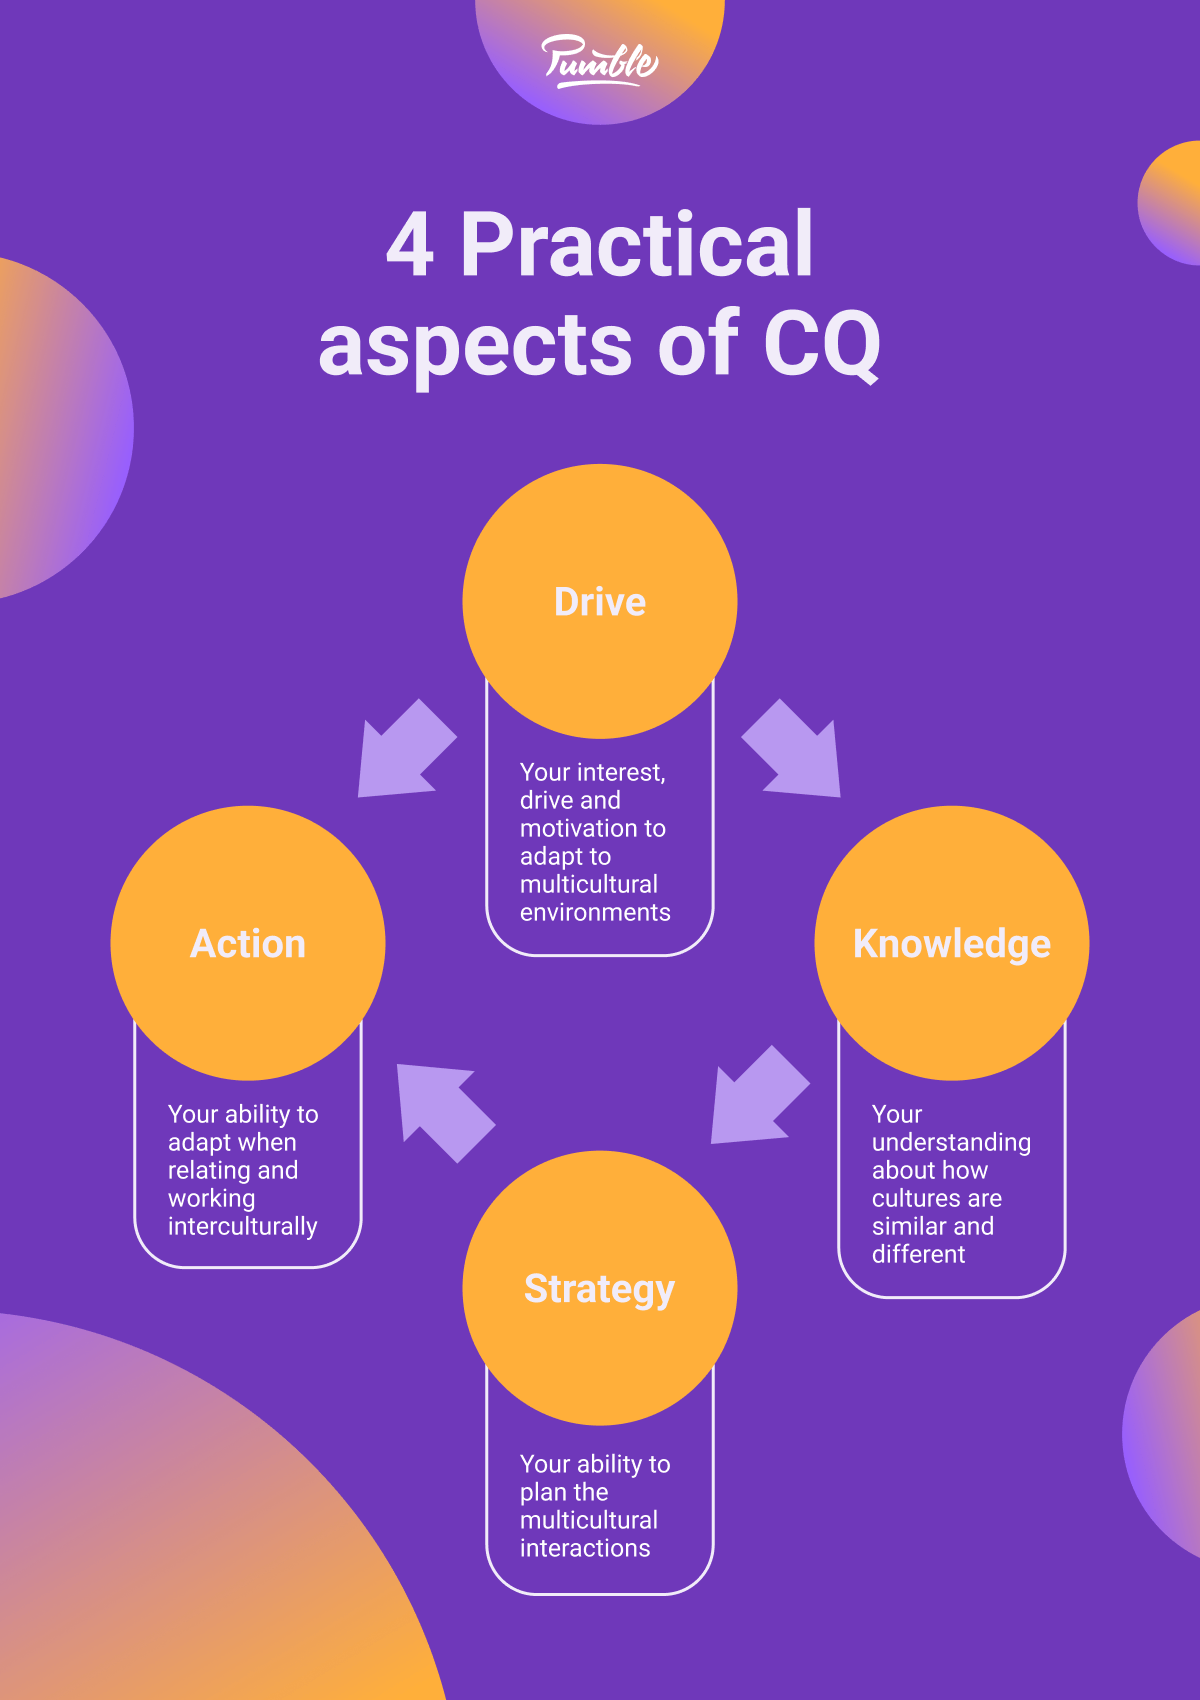 4 Practical aspects of CQ